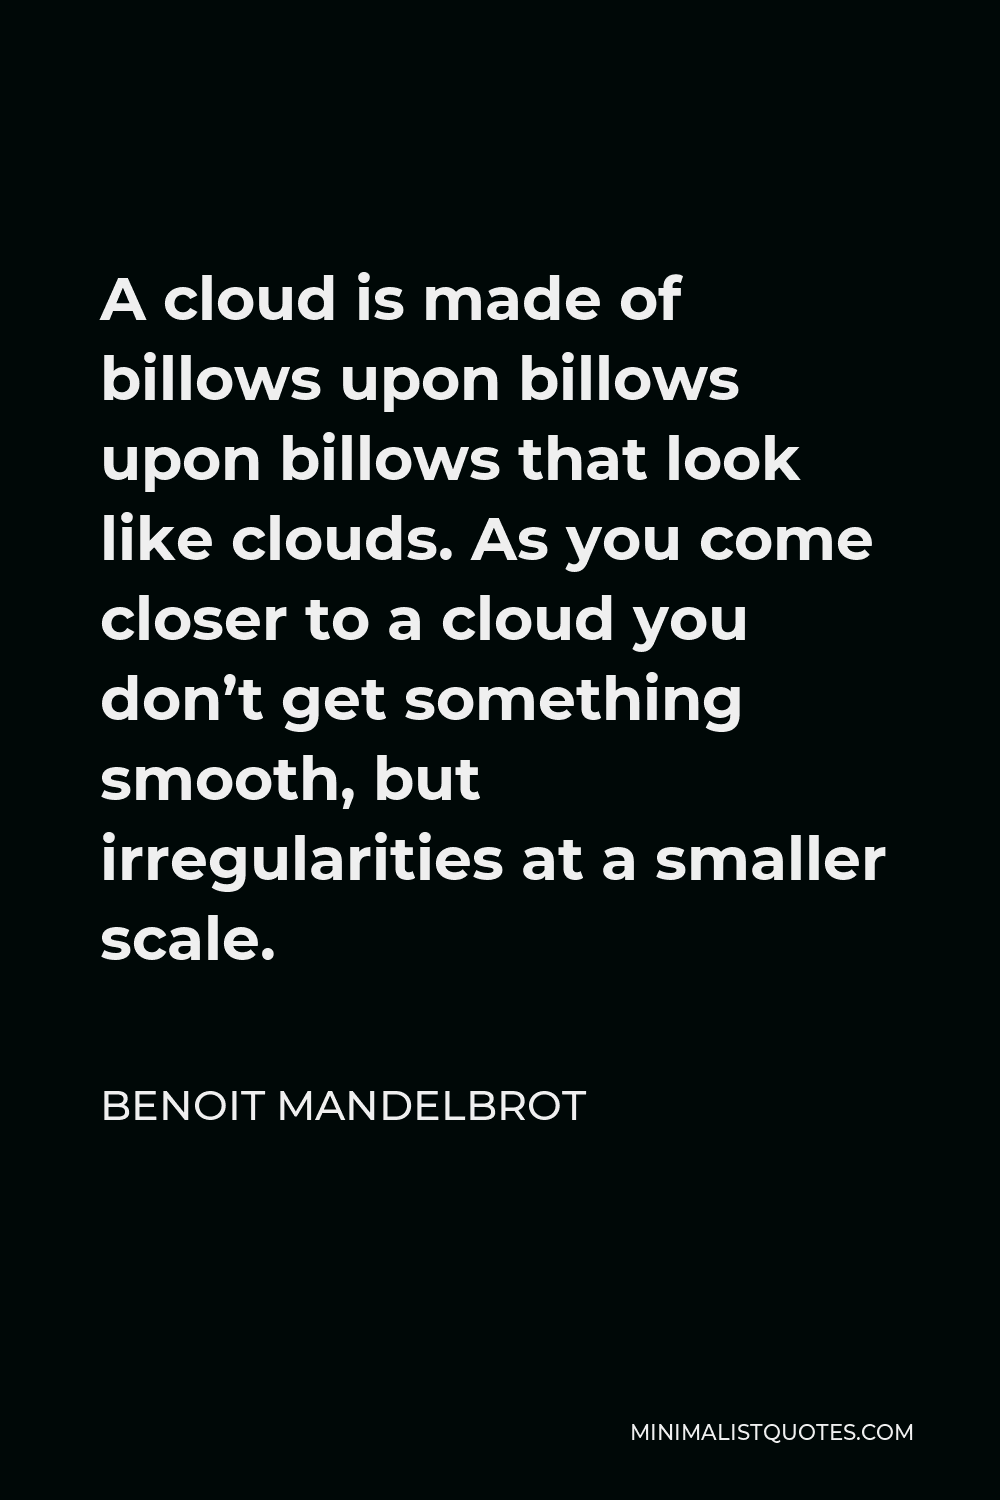 Benoit Mandelbrot Quote - A cloud is made of billows upon billows upon billows that look like clouds. As you come closer to a cloud you don’t get something smooth, but irregularities at a smaller scale.